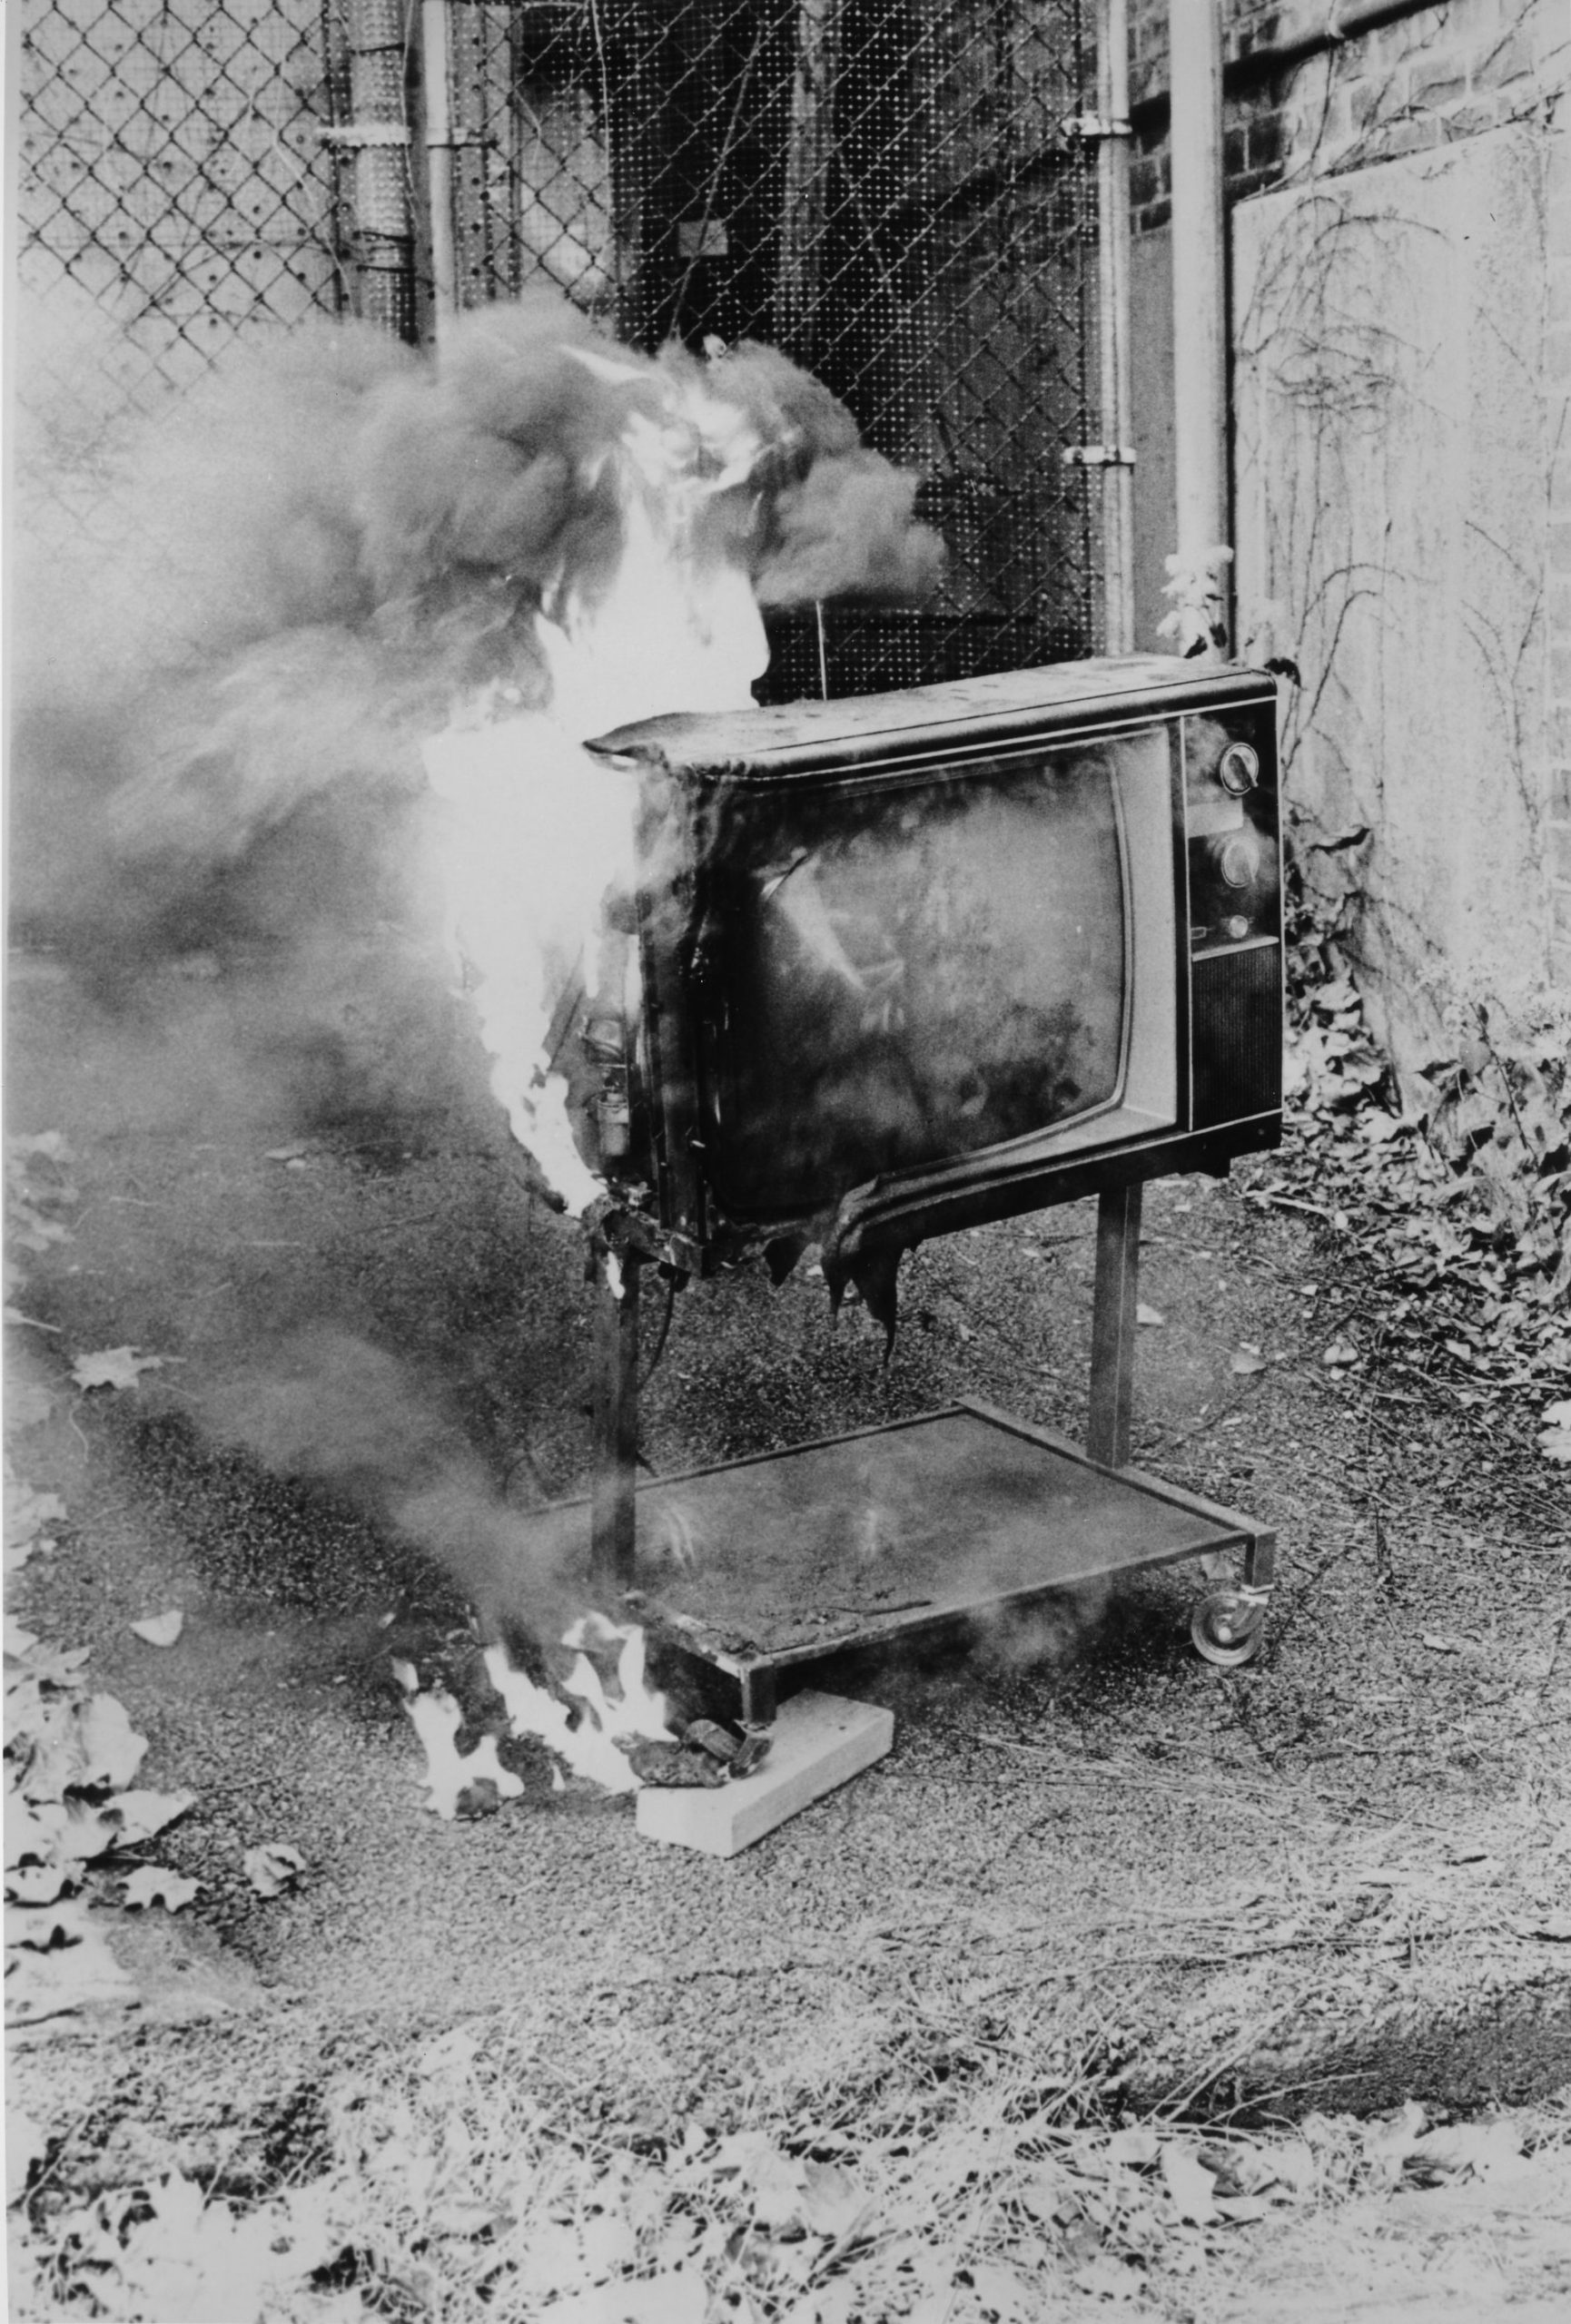 image showing television set on fire